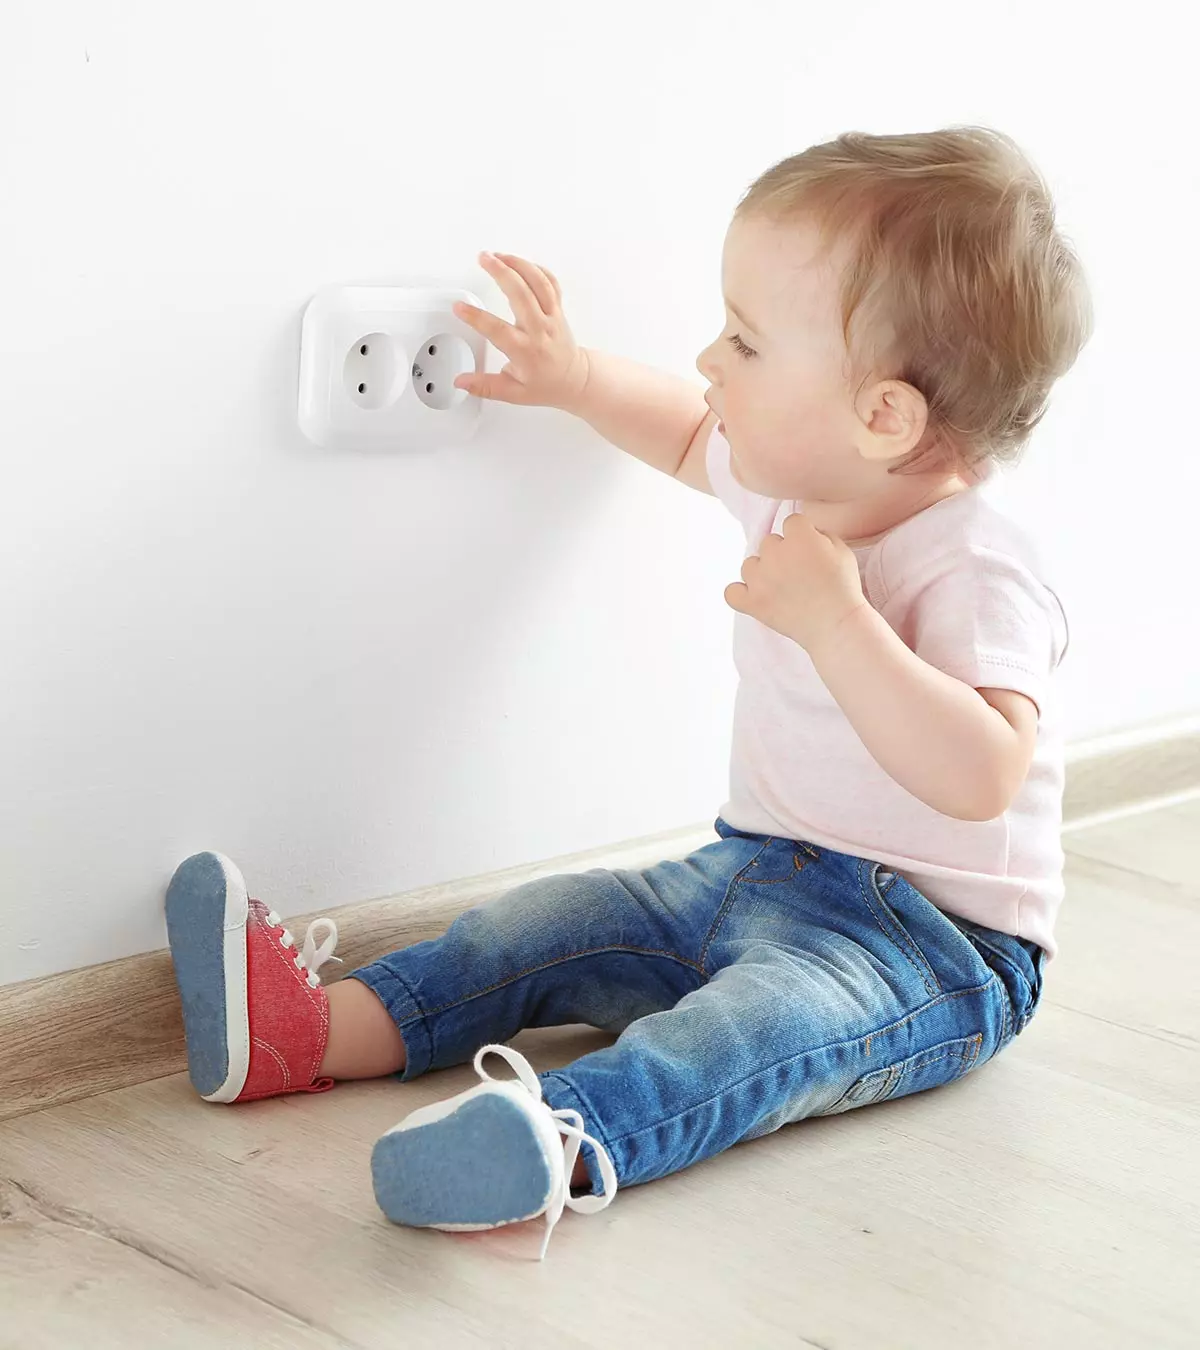 Best Outlet Covers To Babyproof Your Home In 2019